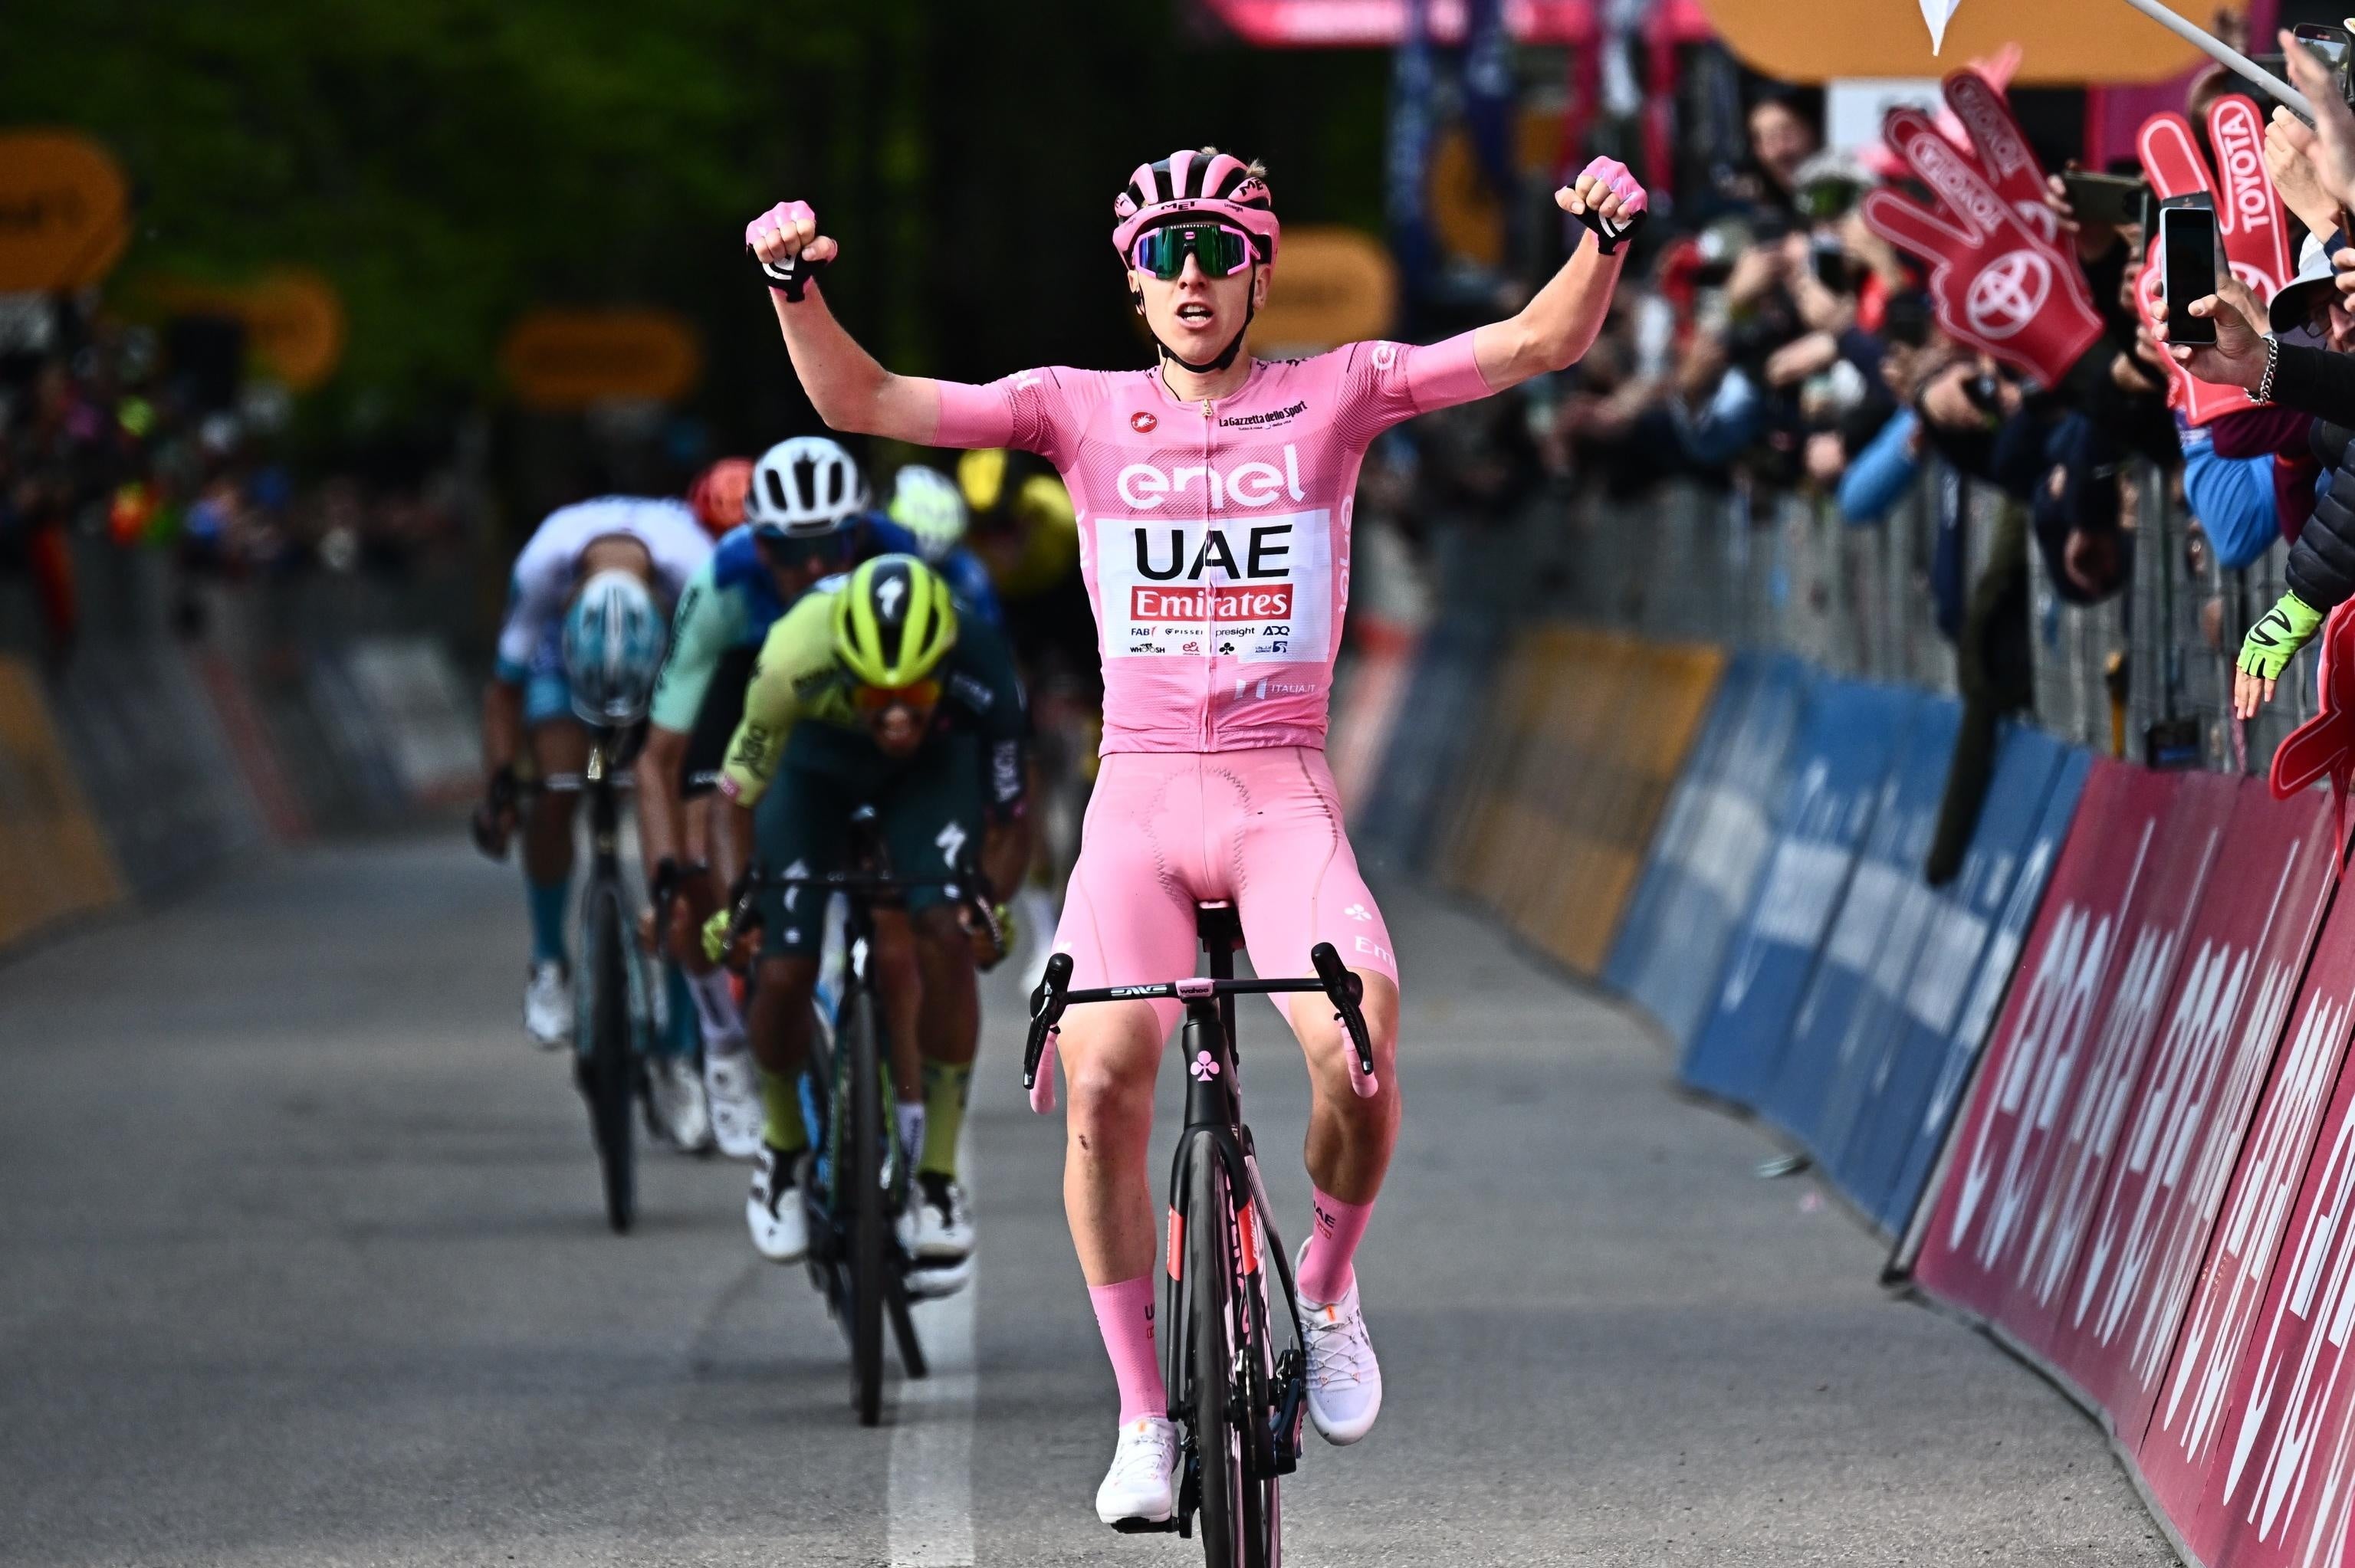 Tadej Pogacar begins as the favourite for overall victory, having already won the Giro this year